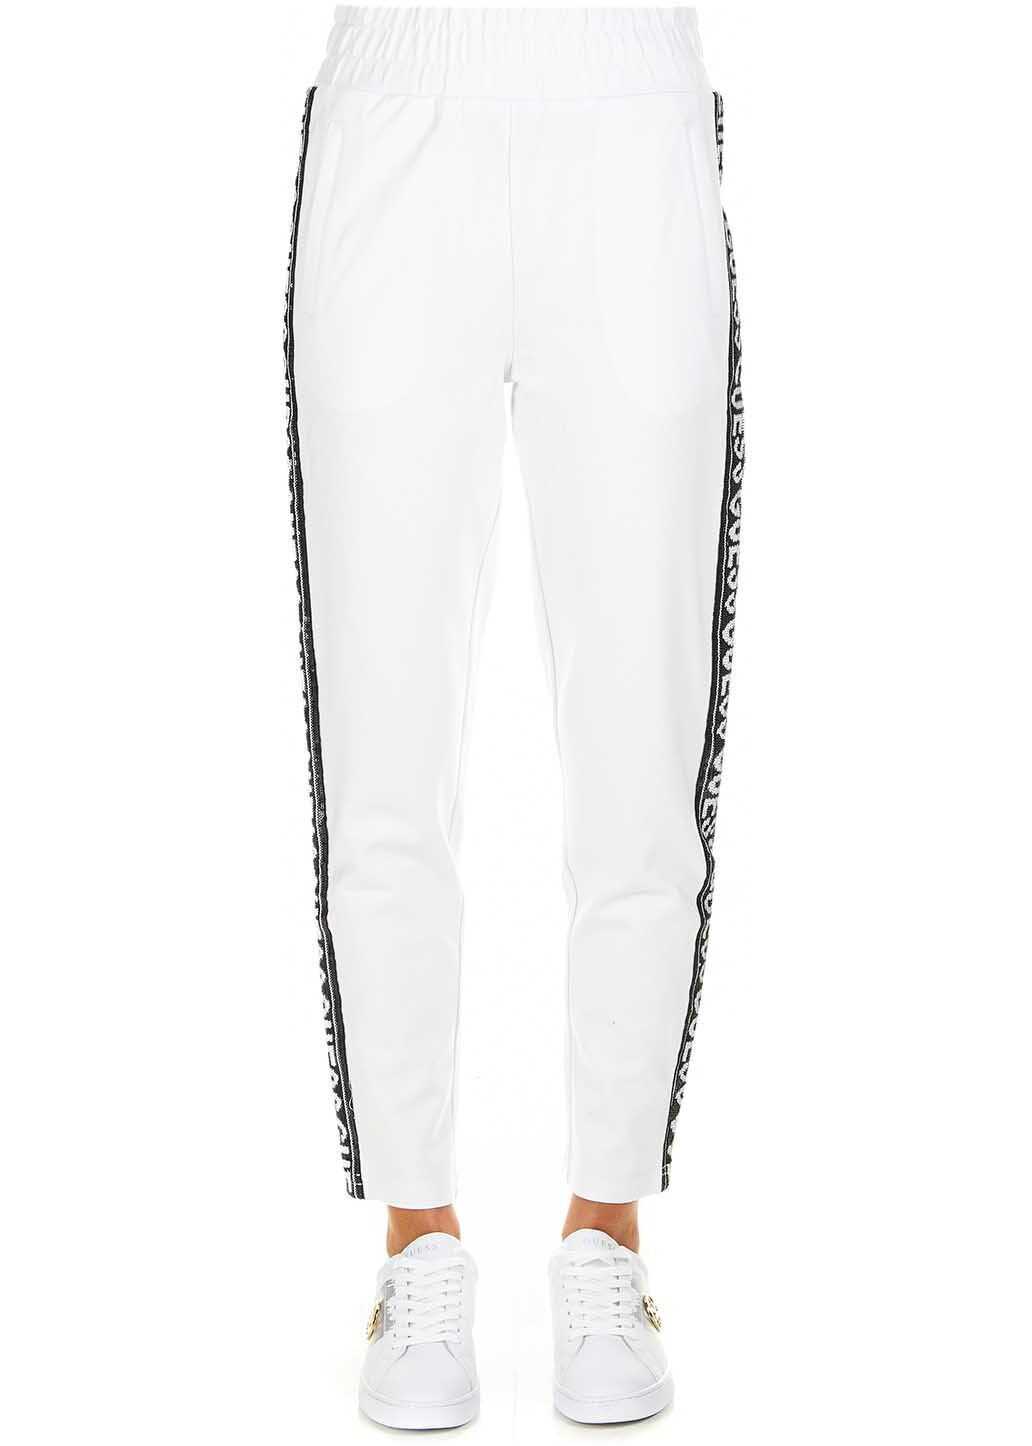 GUESS Trackpants* White